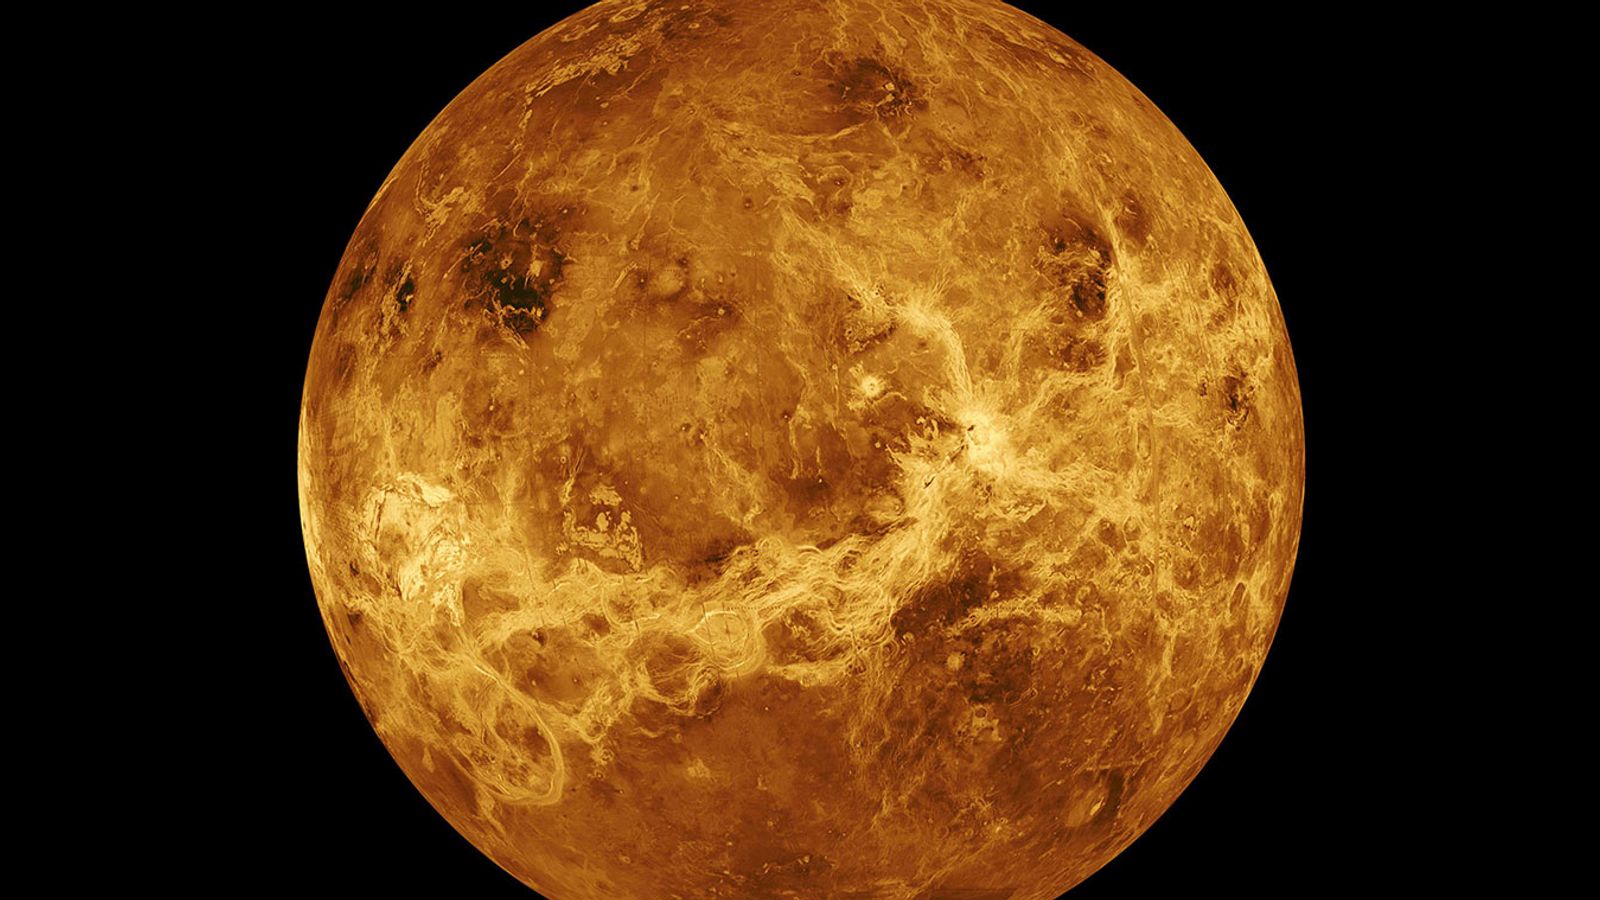 NASA plans two missions to Venus to find out why Earth is ‘currently habitable’ when other planets near us are not